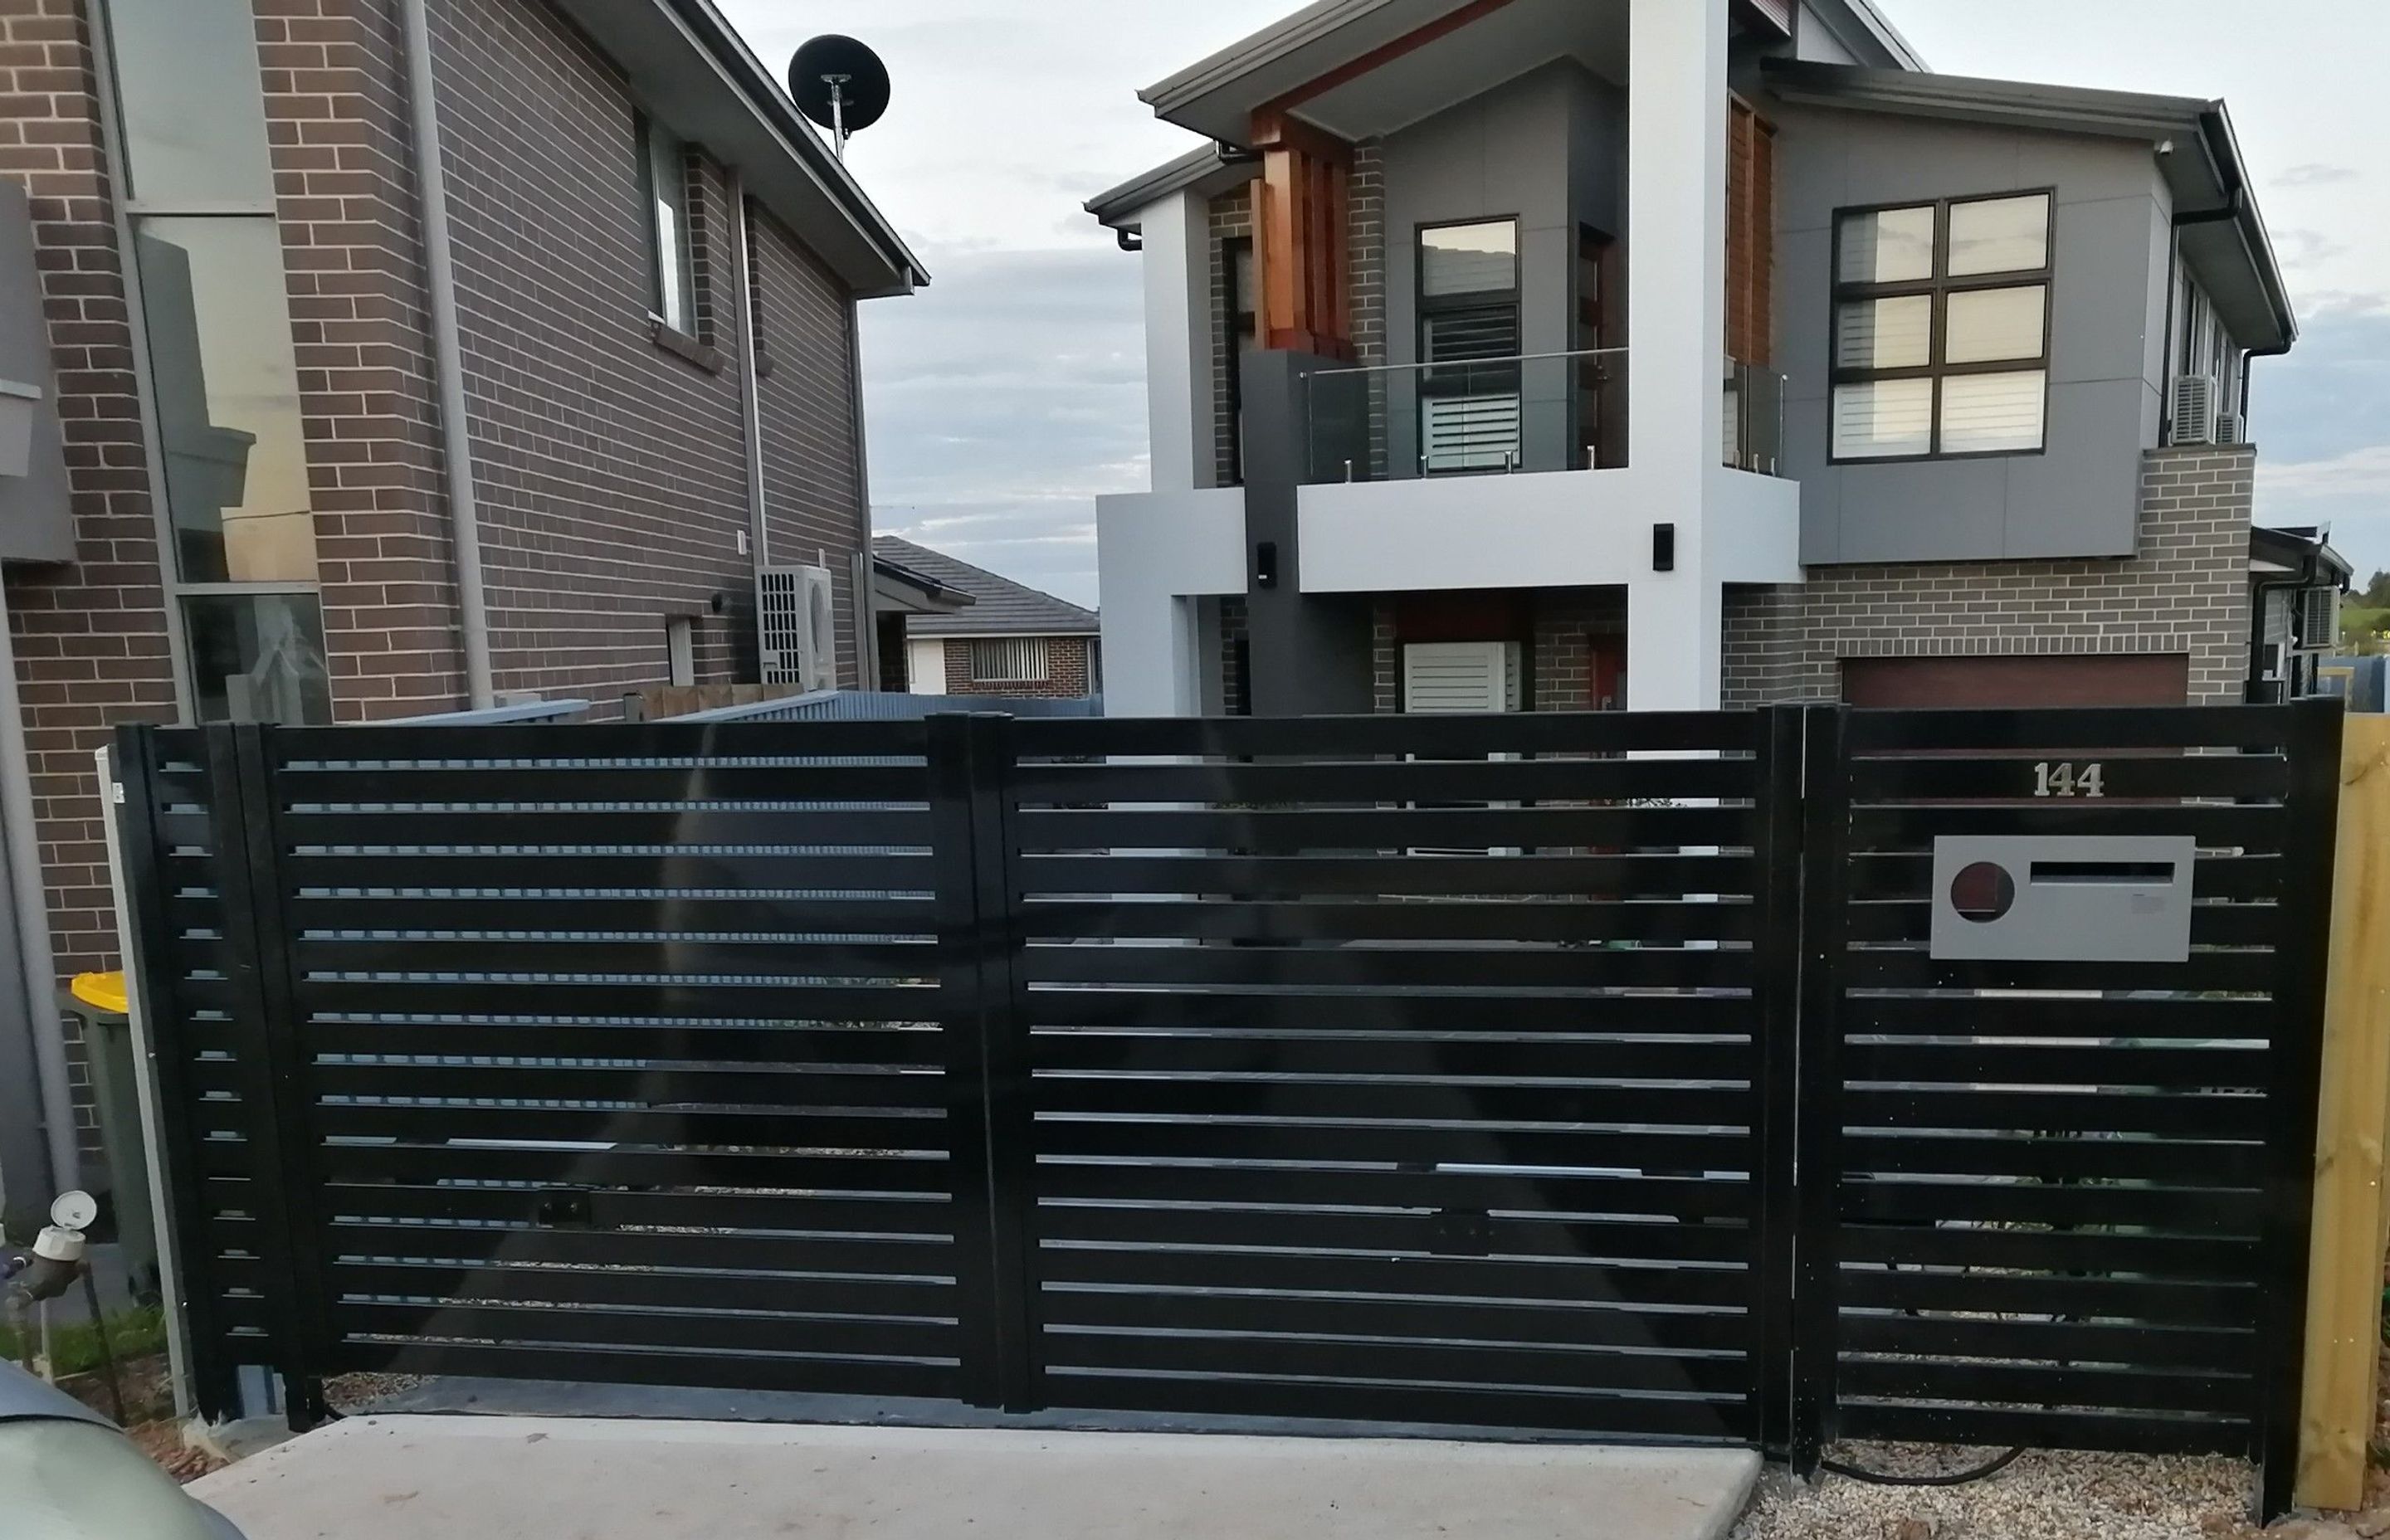 Metal Fence Projects